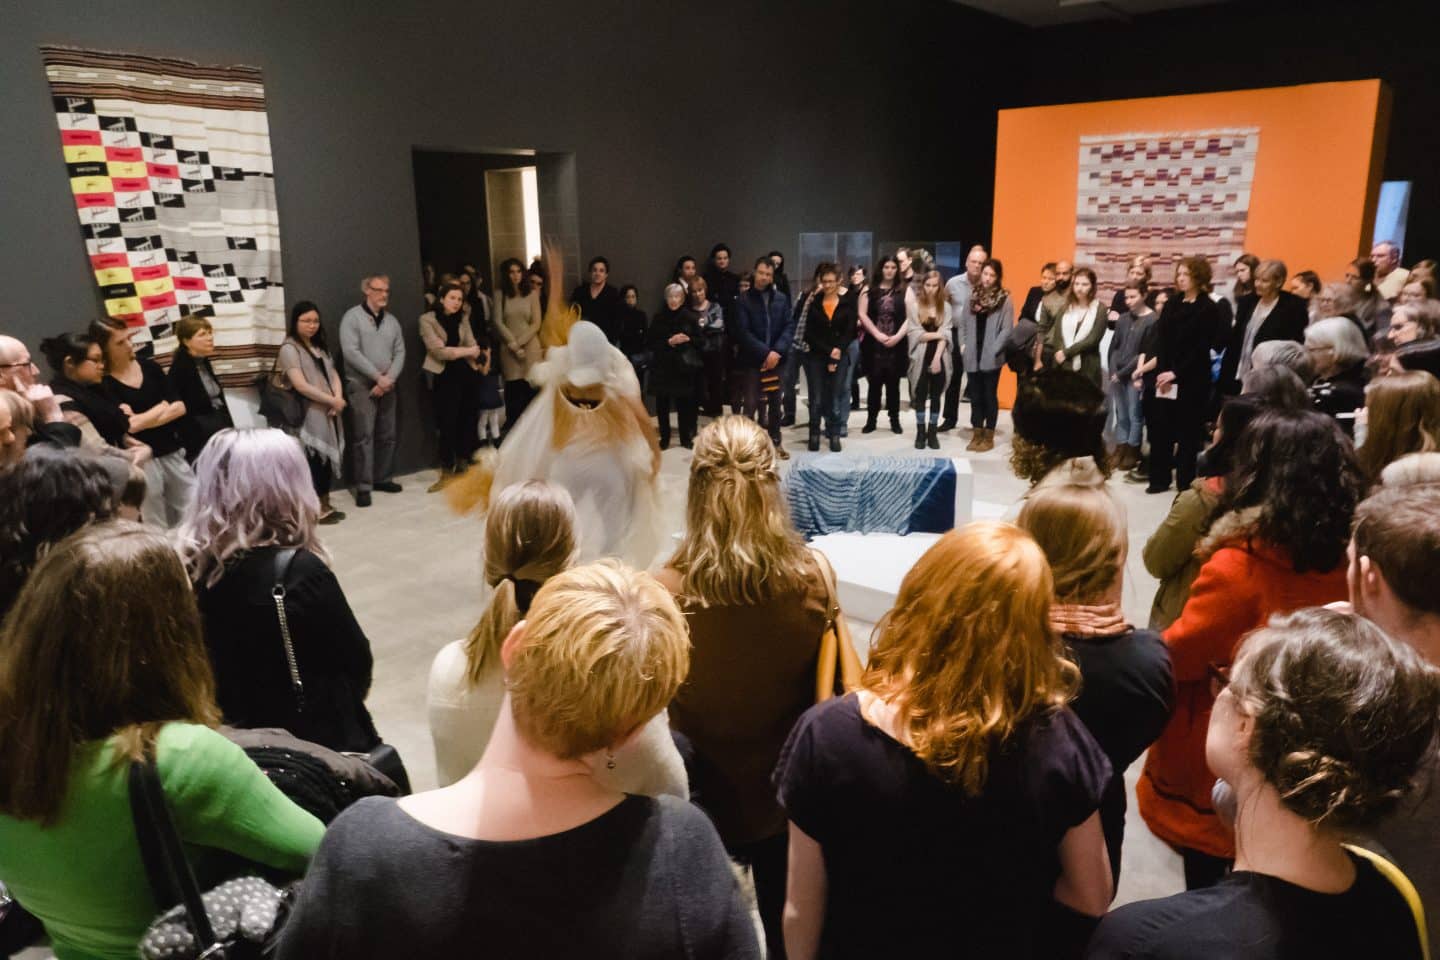 For the Winter Season Launch in 2016, Brendan Fernandes mesmerized audiences with In Touch, a solo dance performed in the galleries by Lua Shayenne. Photo: Tim Forbes